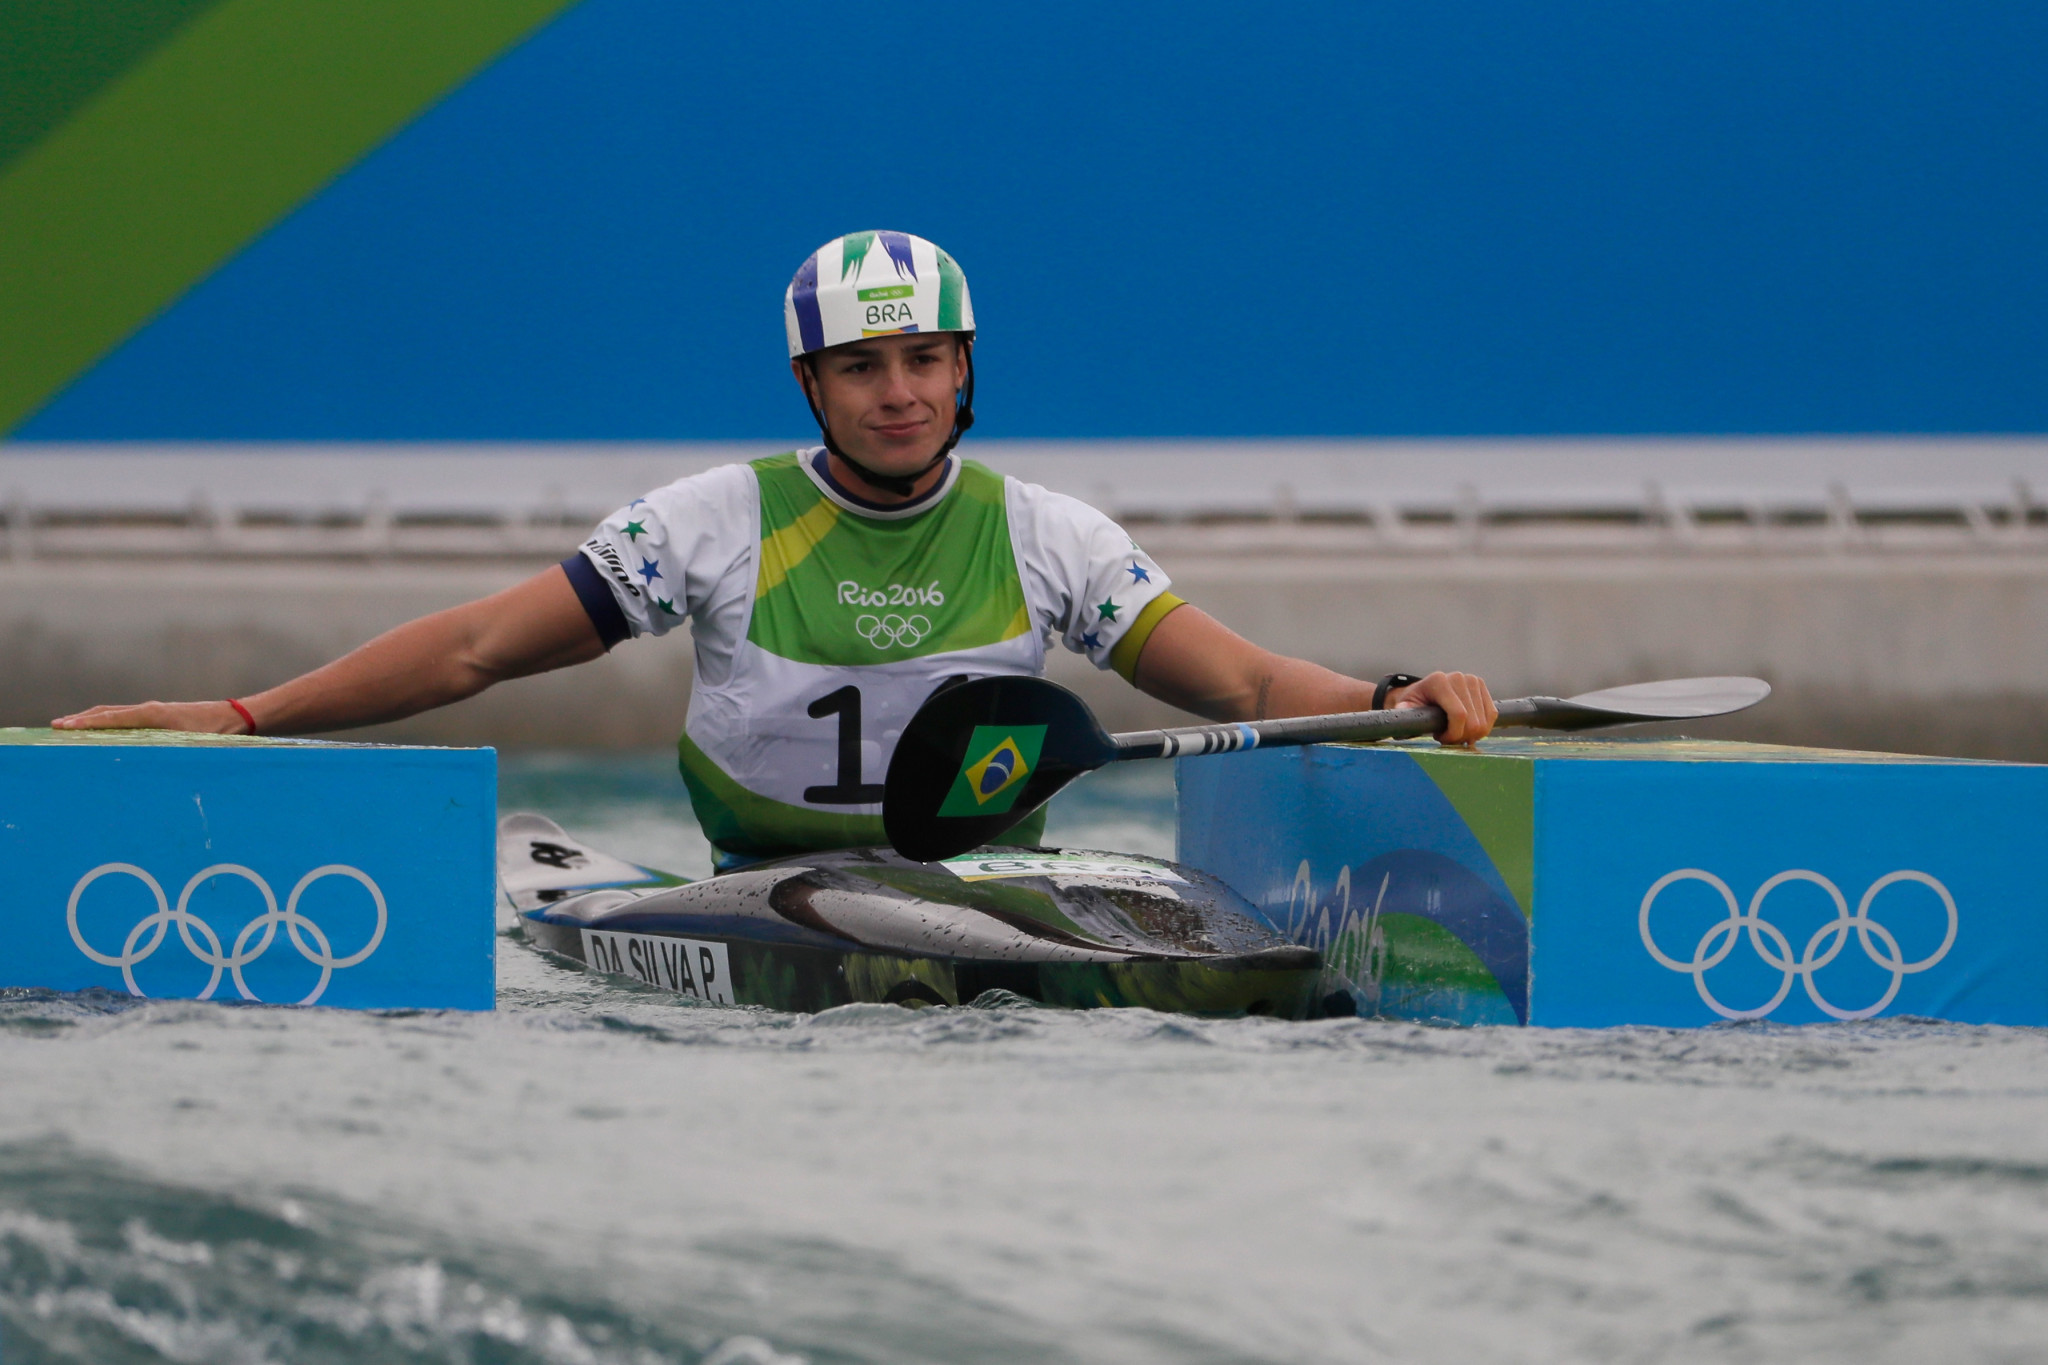 Pedro Henrique Goncalves Da Silva was among Brazil's gold medallists on the final day of canoe slalom action at the South American Games ©Getty Images